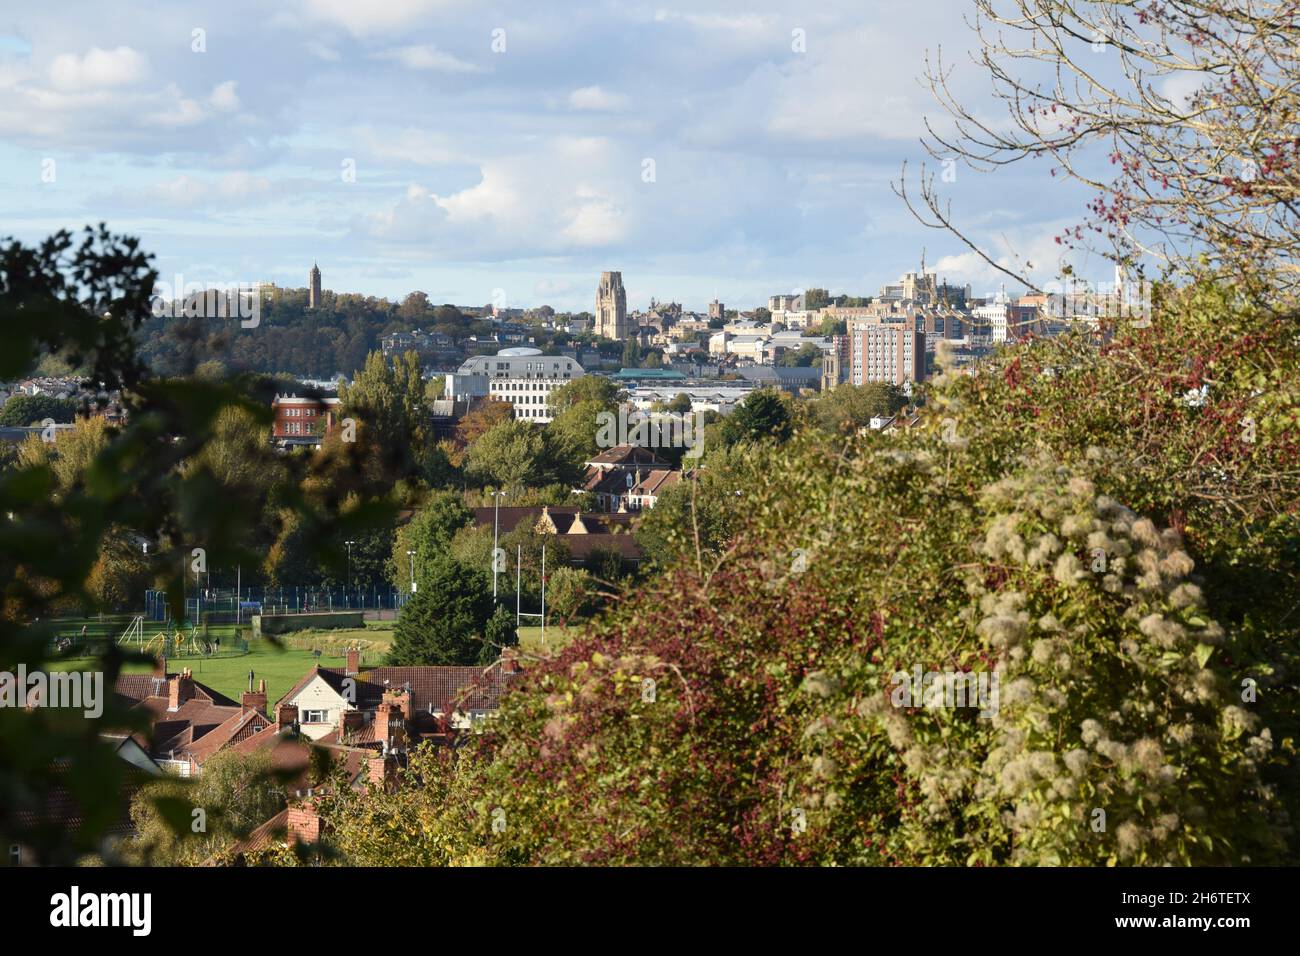 Cityscape of Bristol as seen from the Northern Slopes nature reserve.  Suburban terraces in foreground with skyline of city centre on the horizon Stock Photo